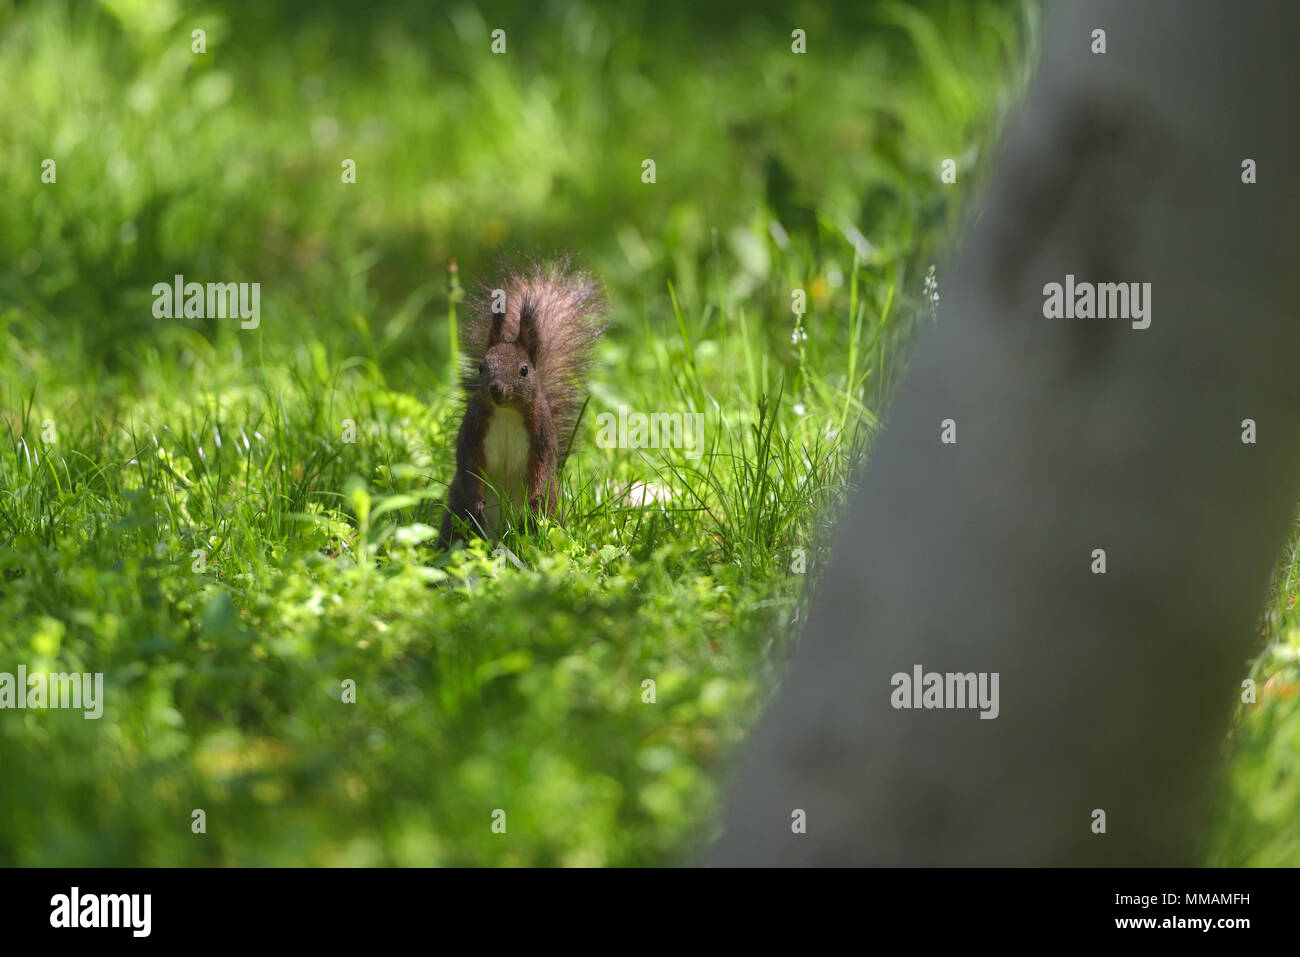 Red squirell (Sciurus vulgaris) in green grass of mountain forrest Stock Photo